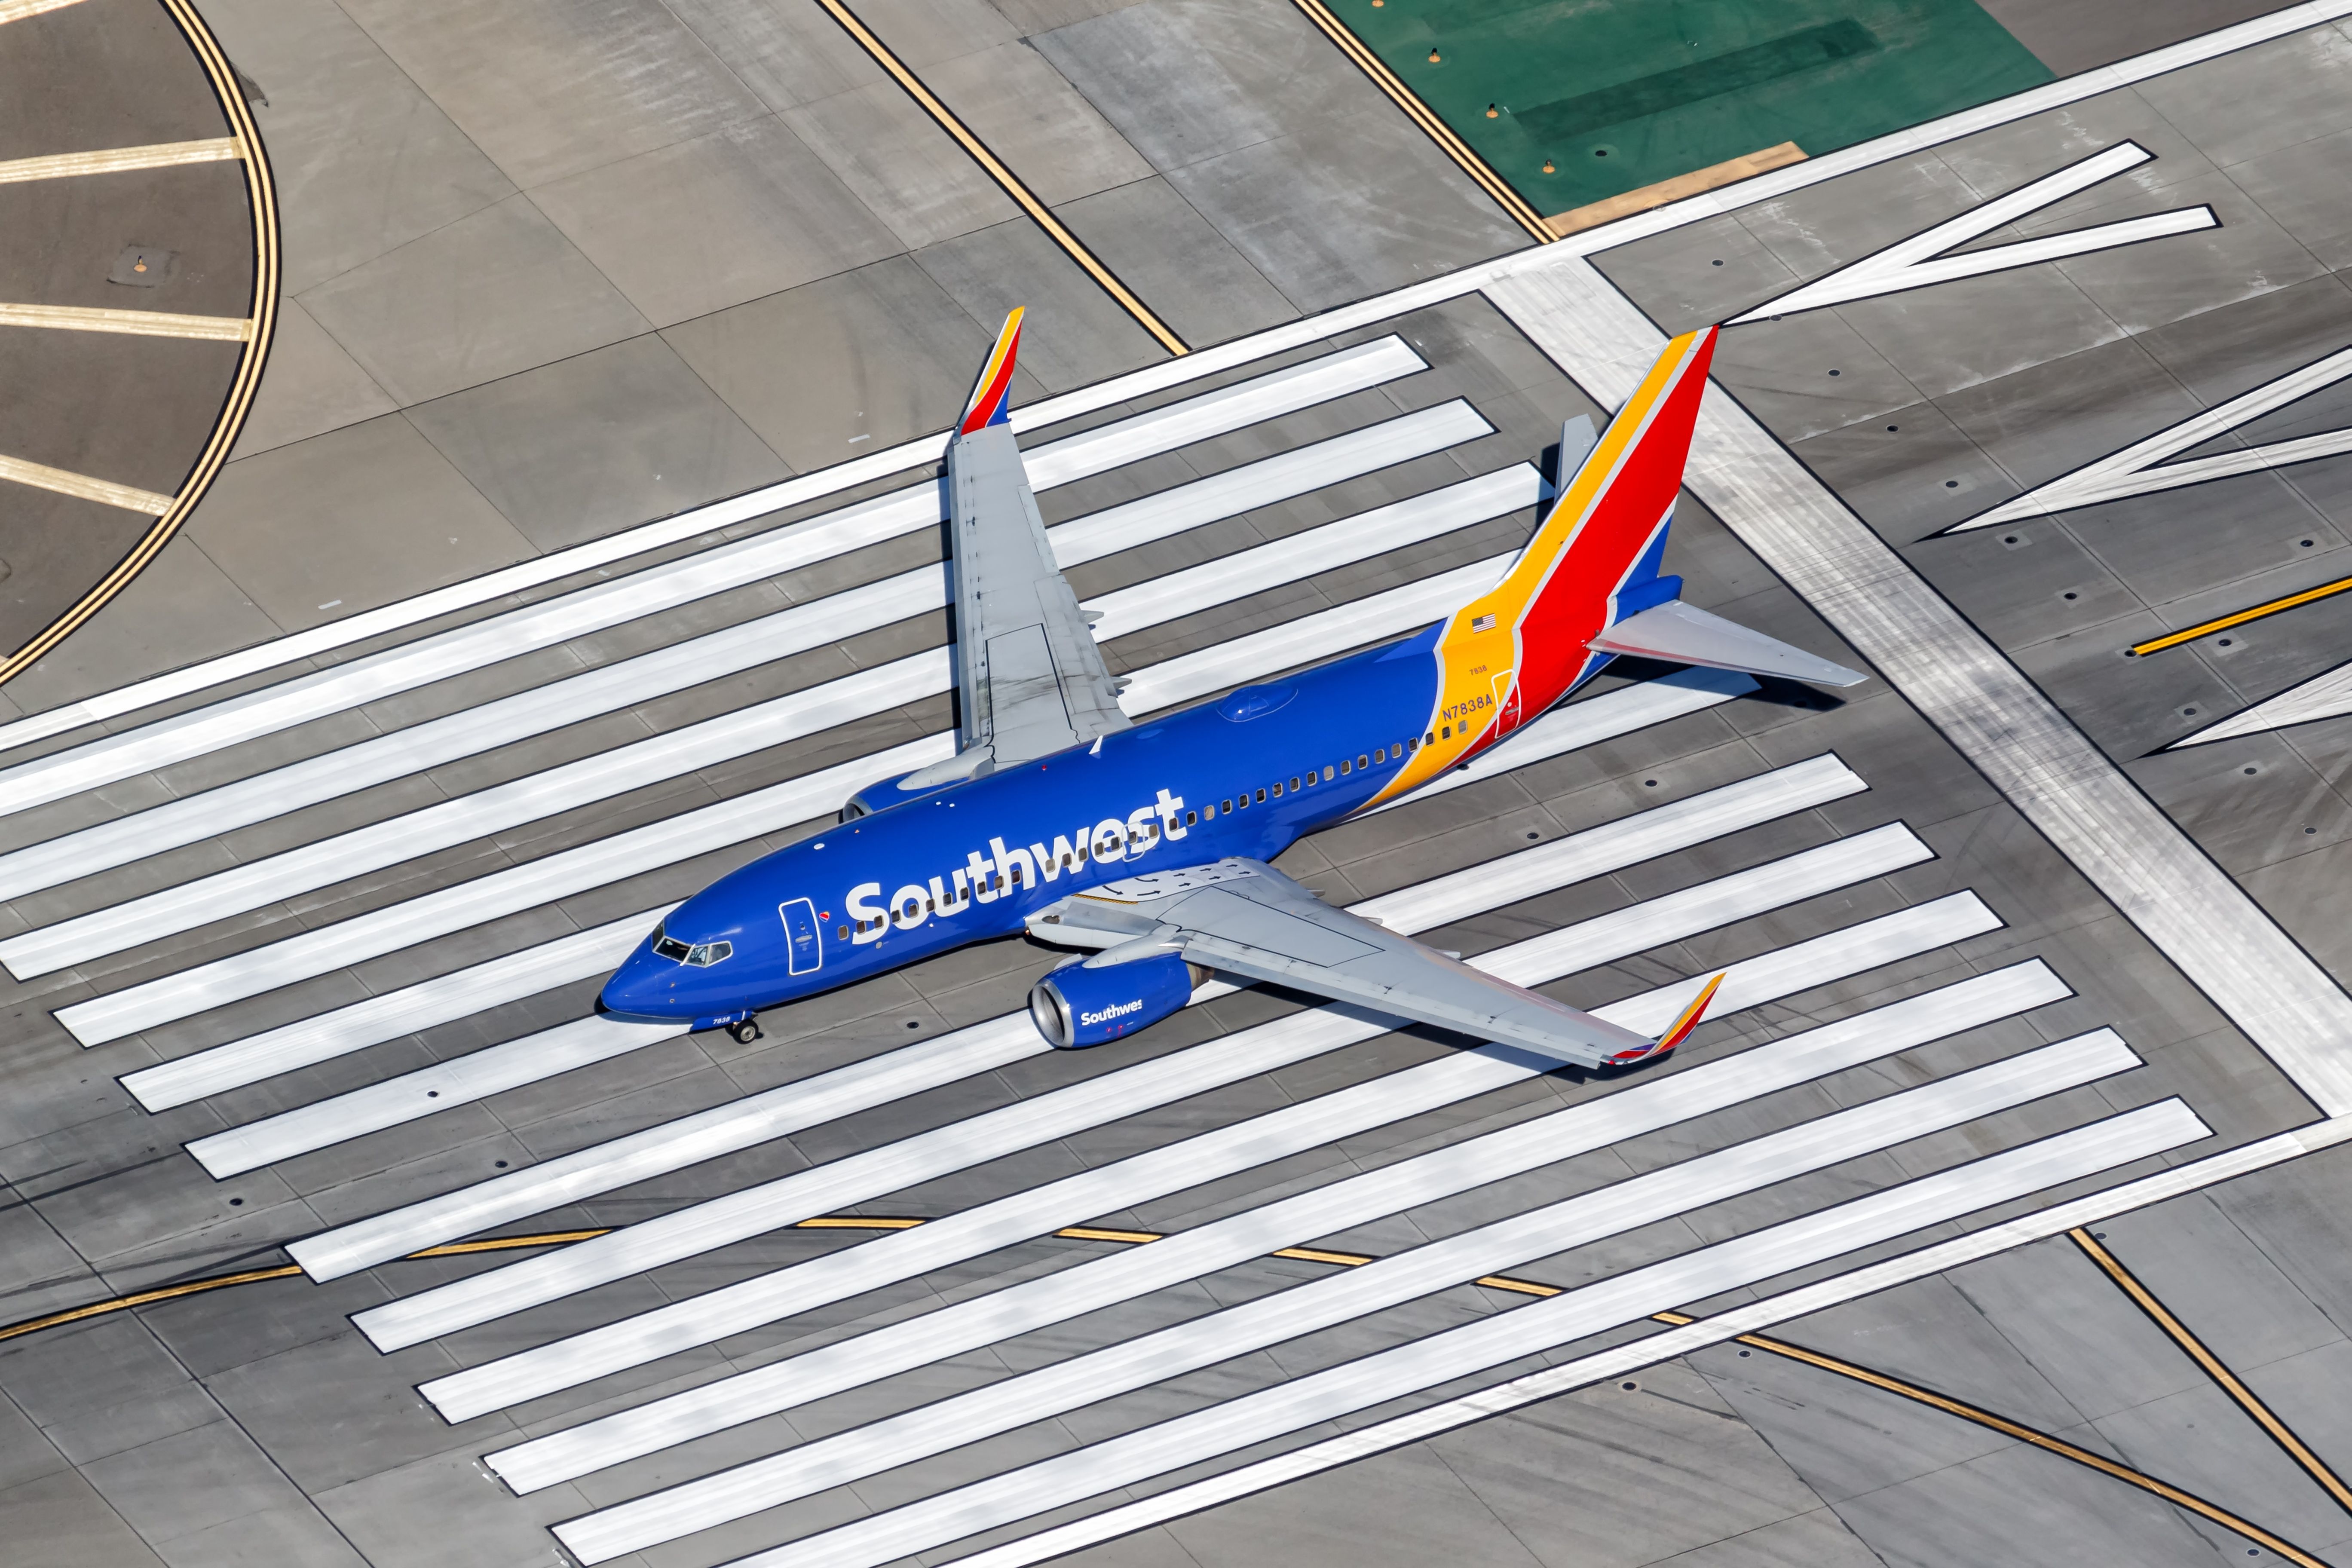 A Southwest Airlines Boeing 737-700 on an airport apron.